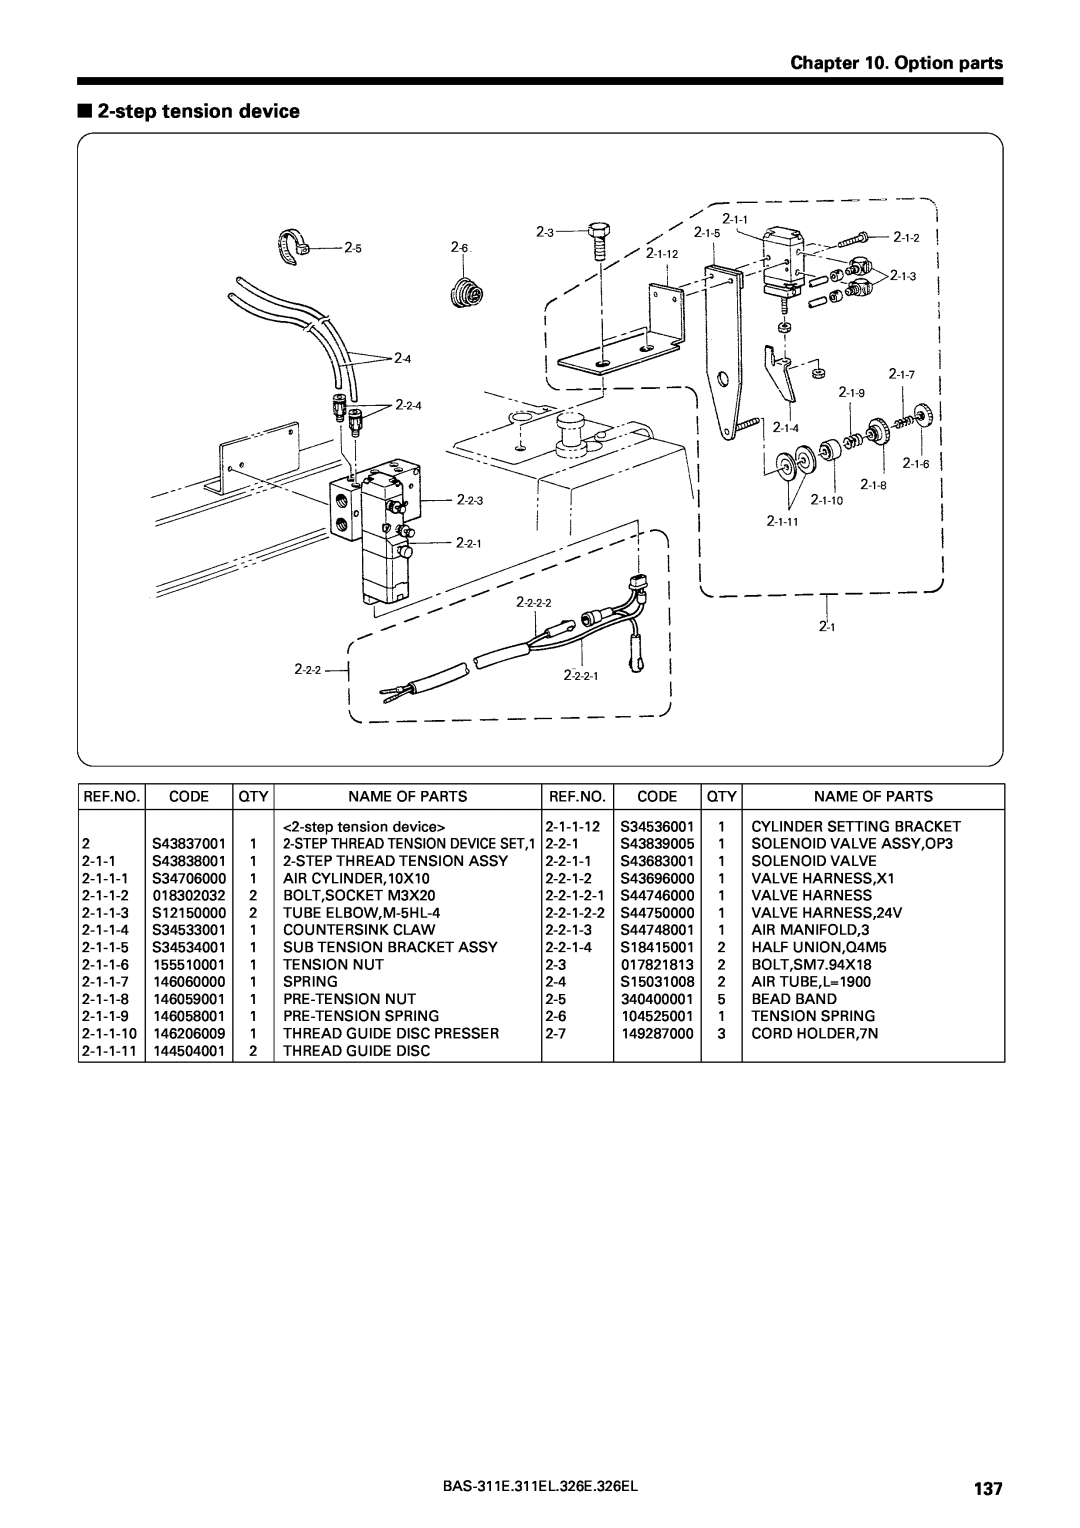 Brother BAS-311E service manual step tension device, Option parts 